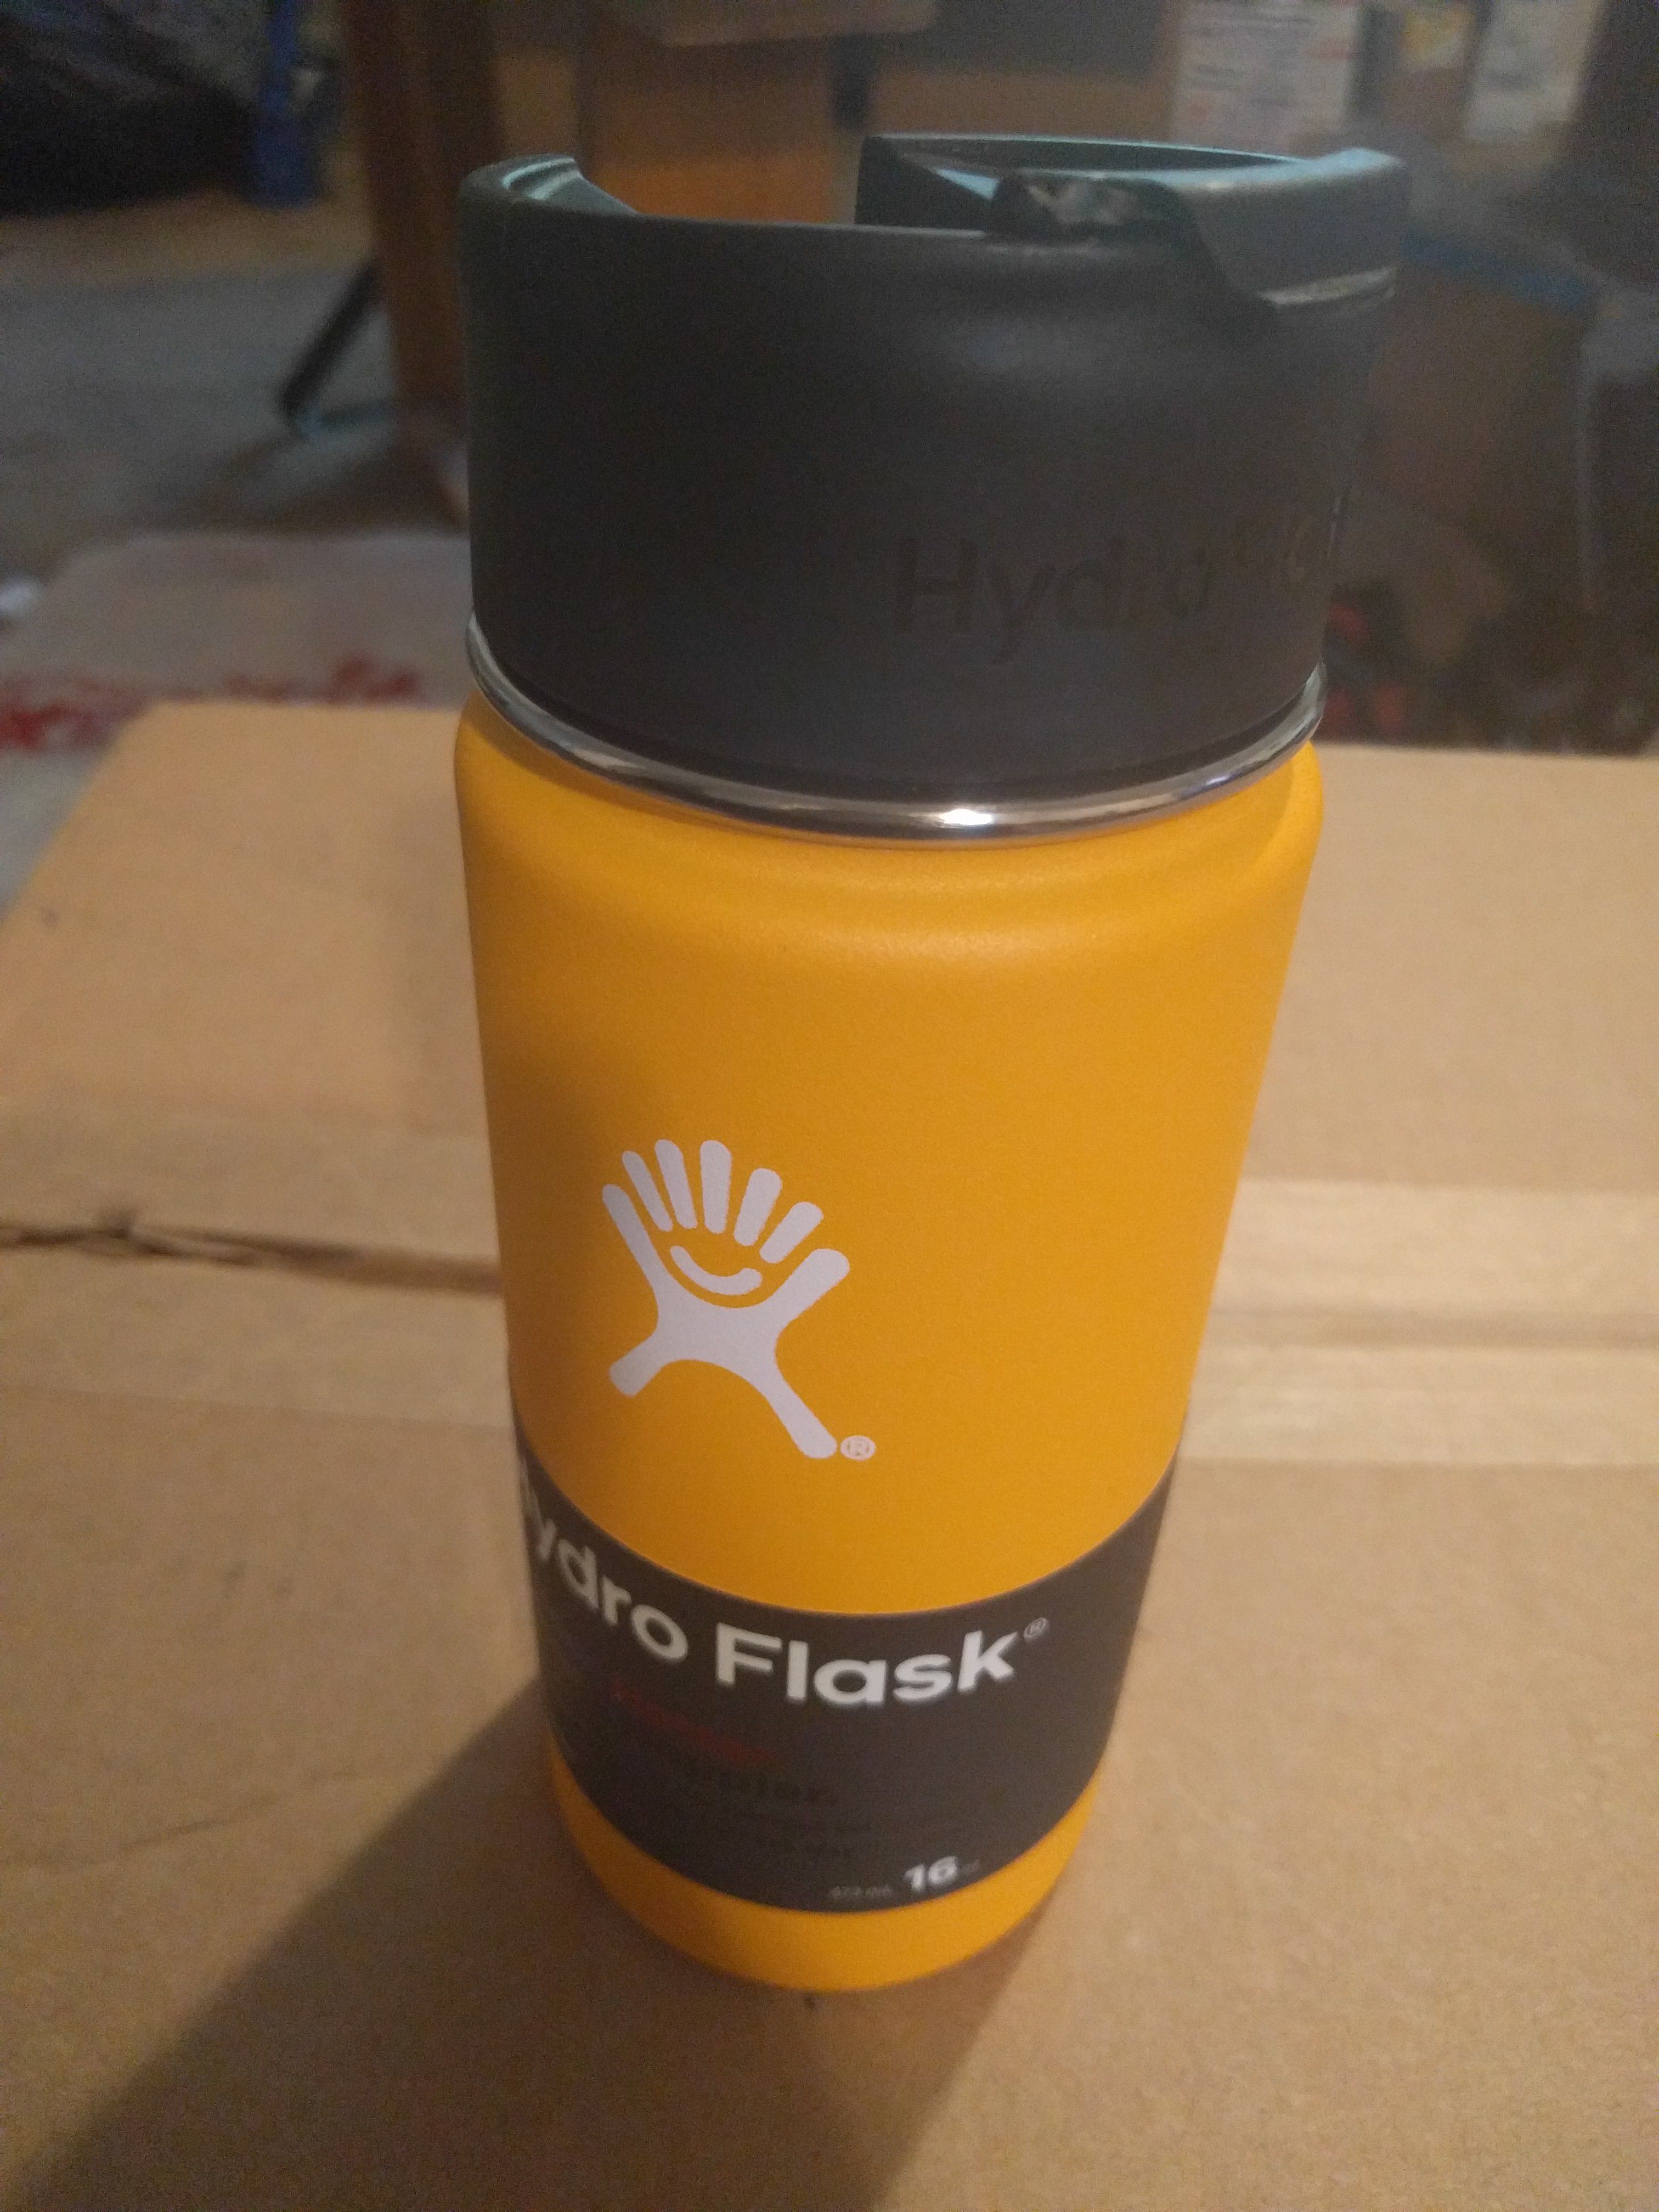 HYDRAPEAK ACTIVE 32 oz Aqua Stainless Steel Insulated Water Bottle Wide  Mouth. frntcab for Sale in San Antonio, TX - OfferUp